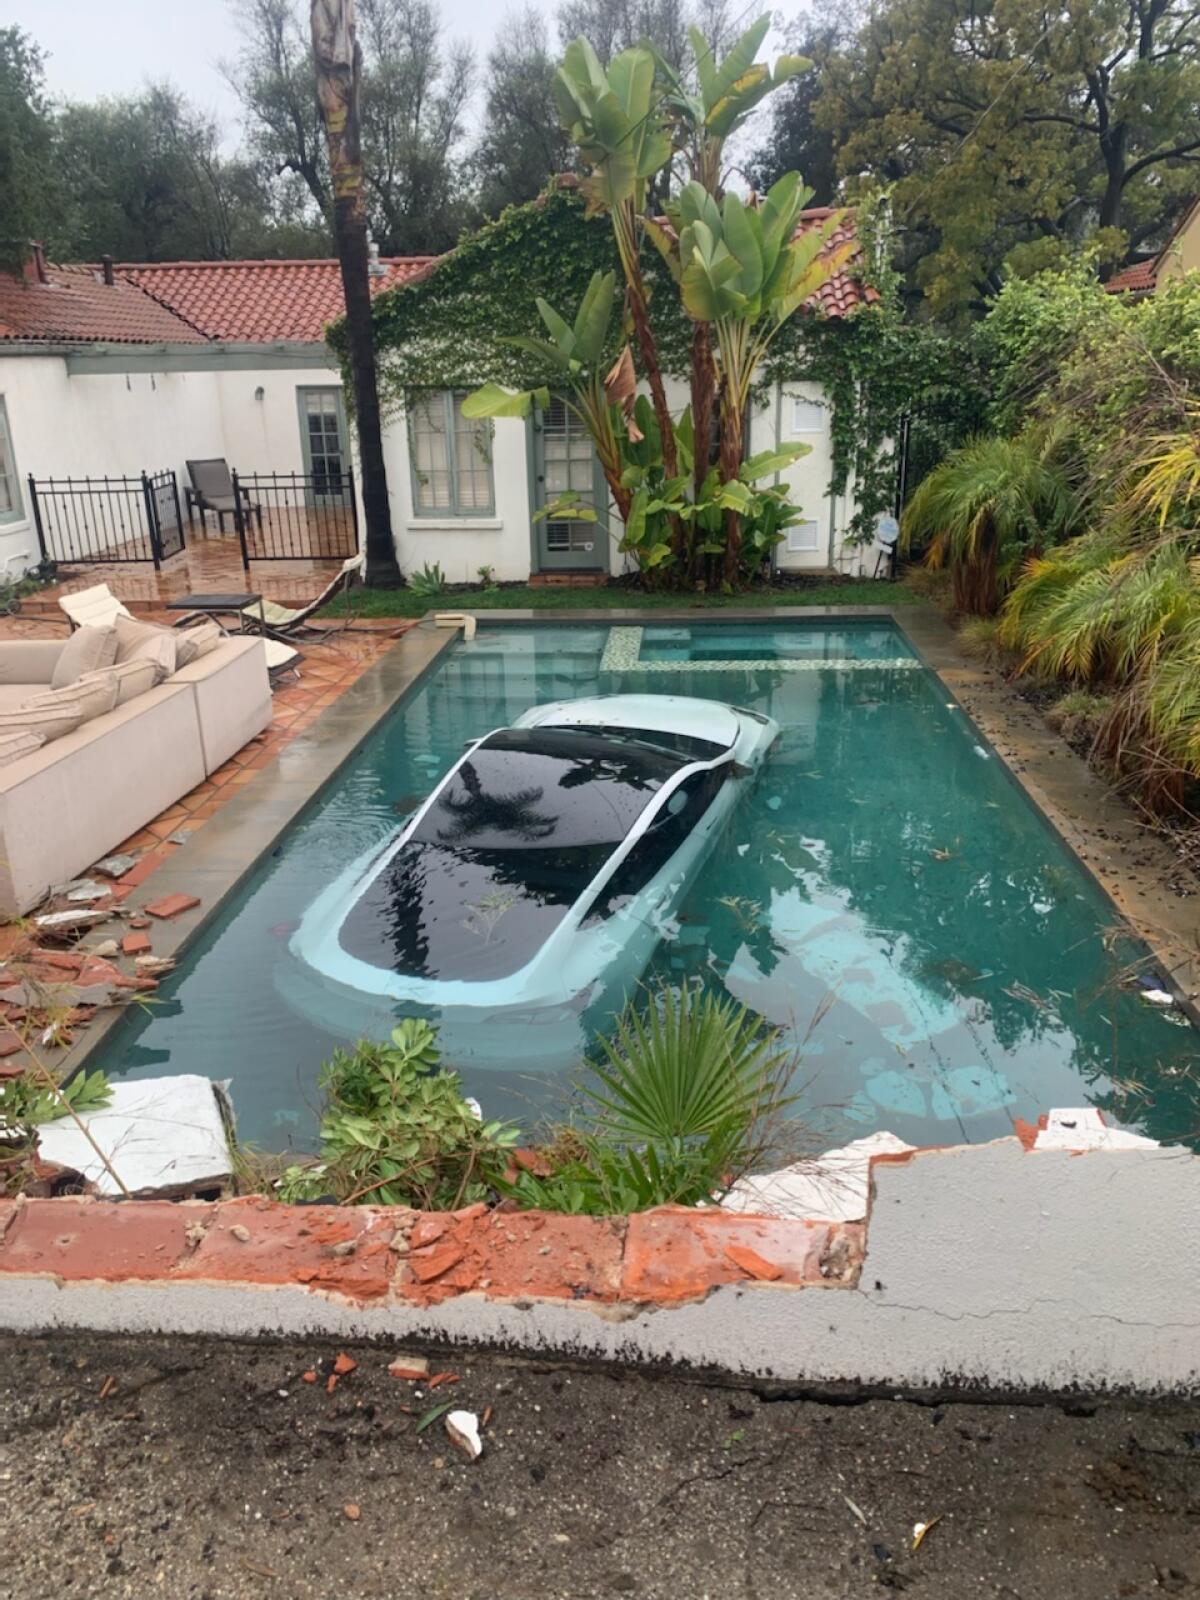 A white Tesla car sits submerged in a pool in a backyard. 